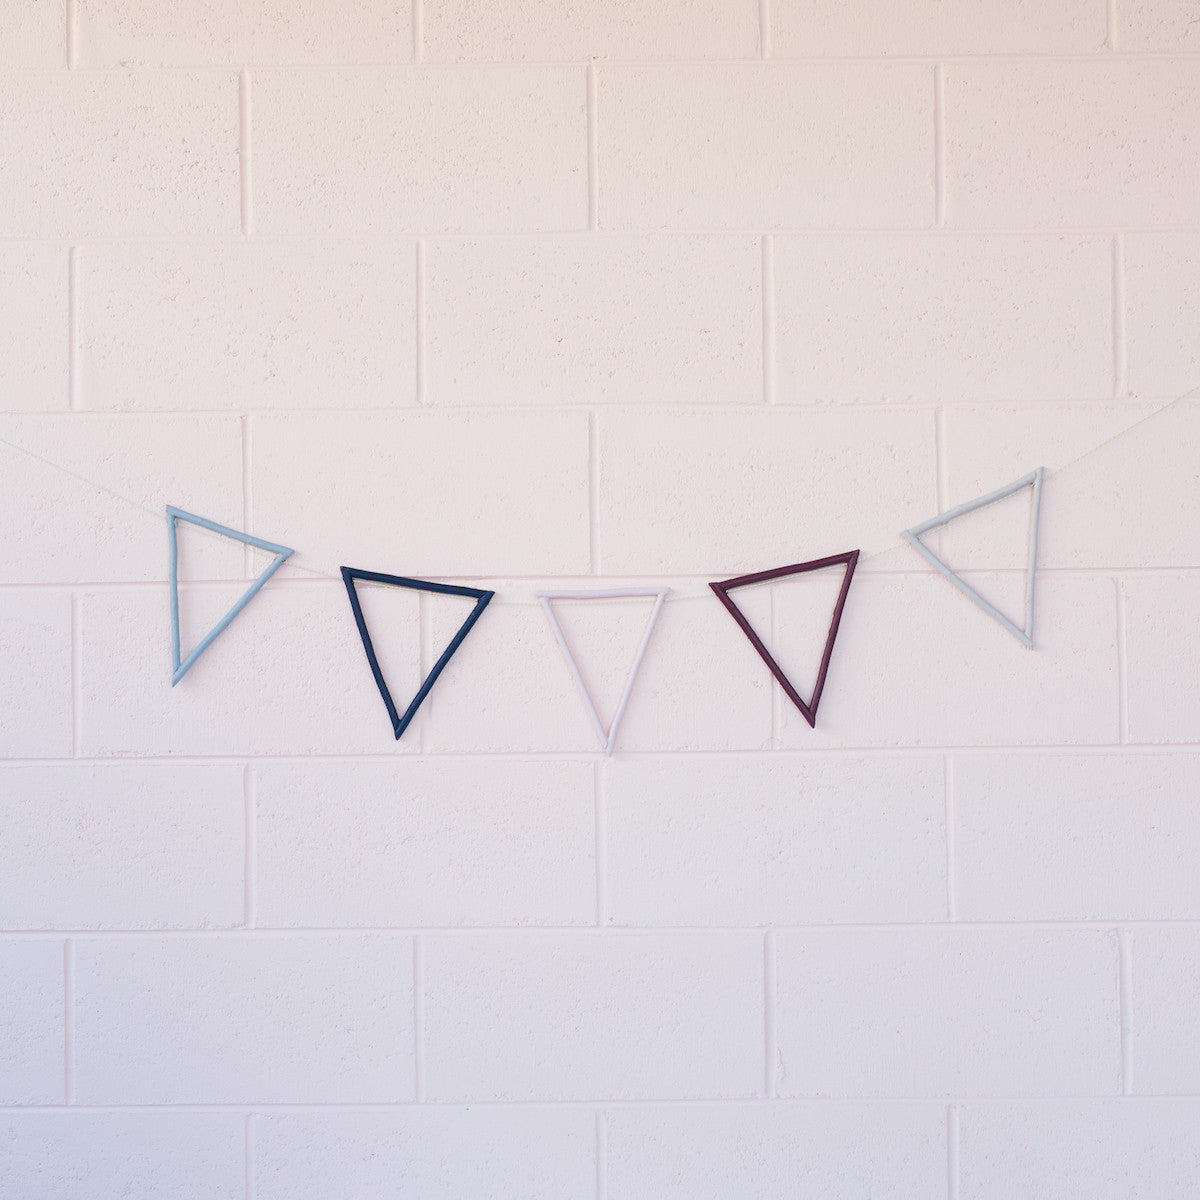 bunting by twiggargerie